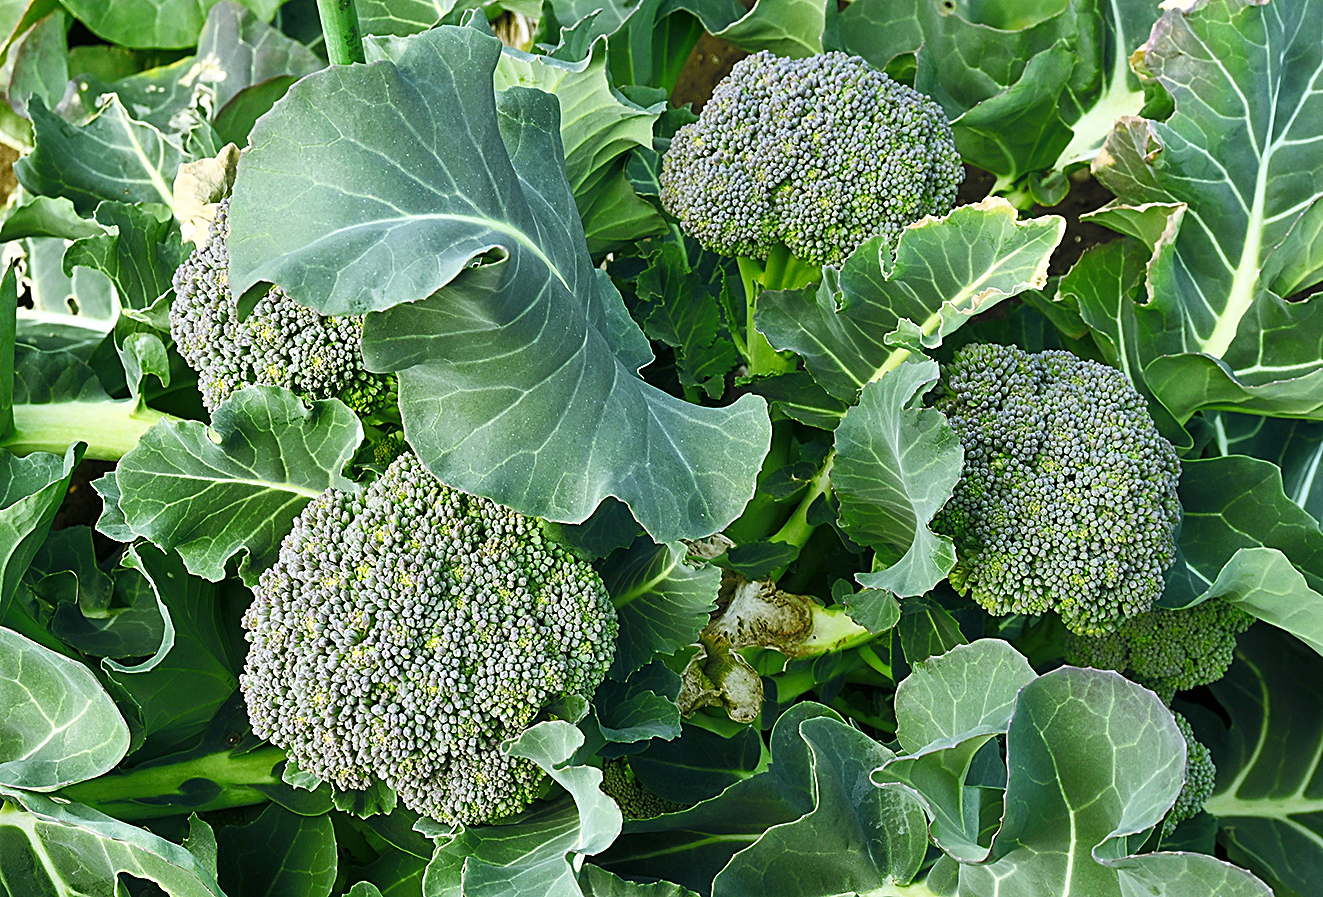 Broccoli cultivation in the vegetable garden. It is a green-yellow vegetable of Brassicaceae with high nutritional value. The flower buds and stems are edible, but the flowers are edible as well.